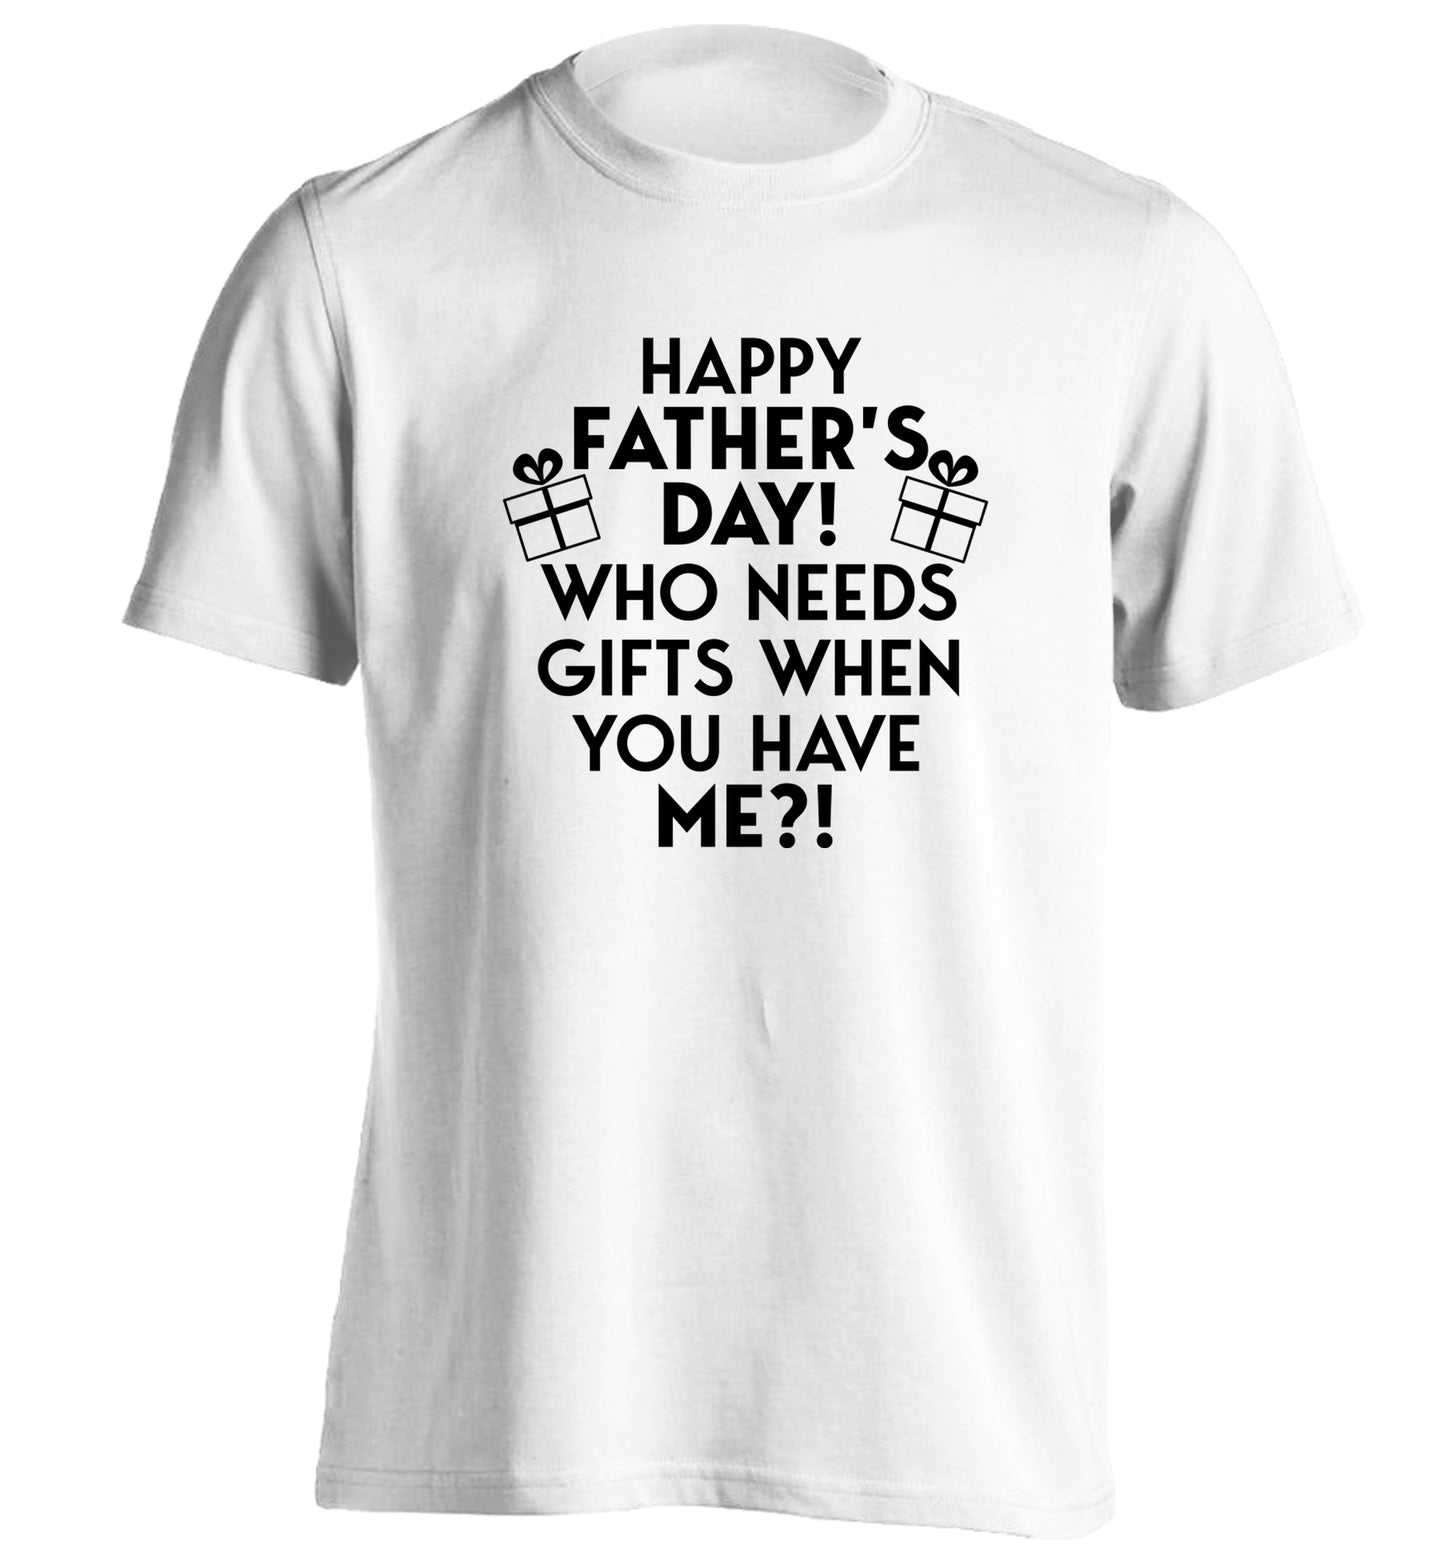 Happy Father's day, who needs a present when you have me adults unisex white Tshirt 2XL